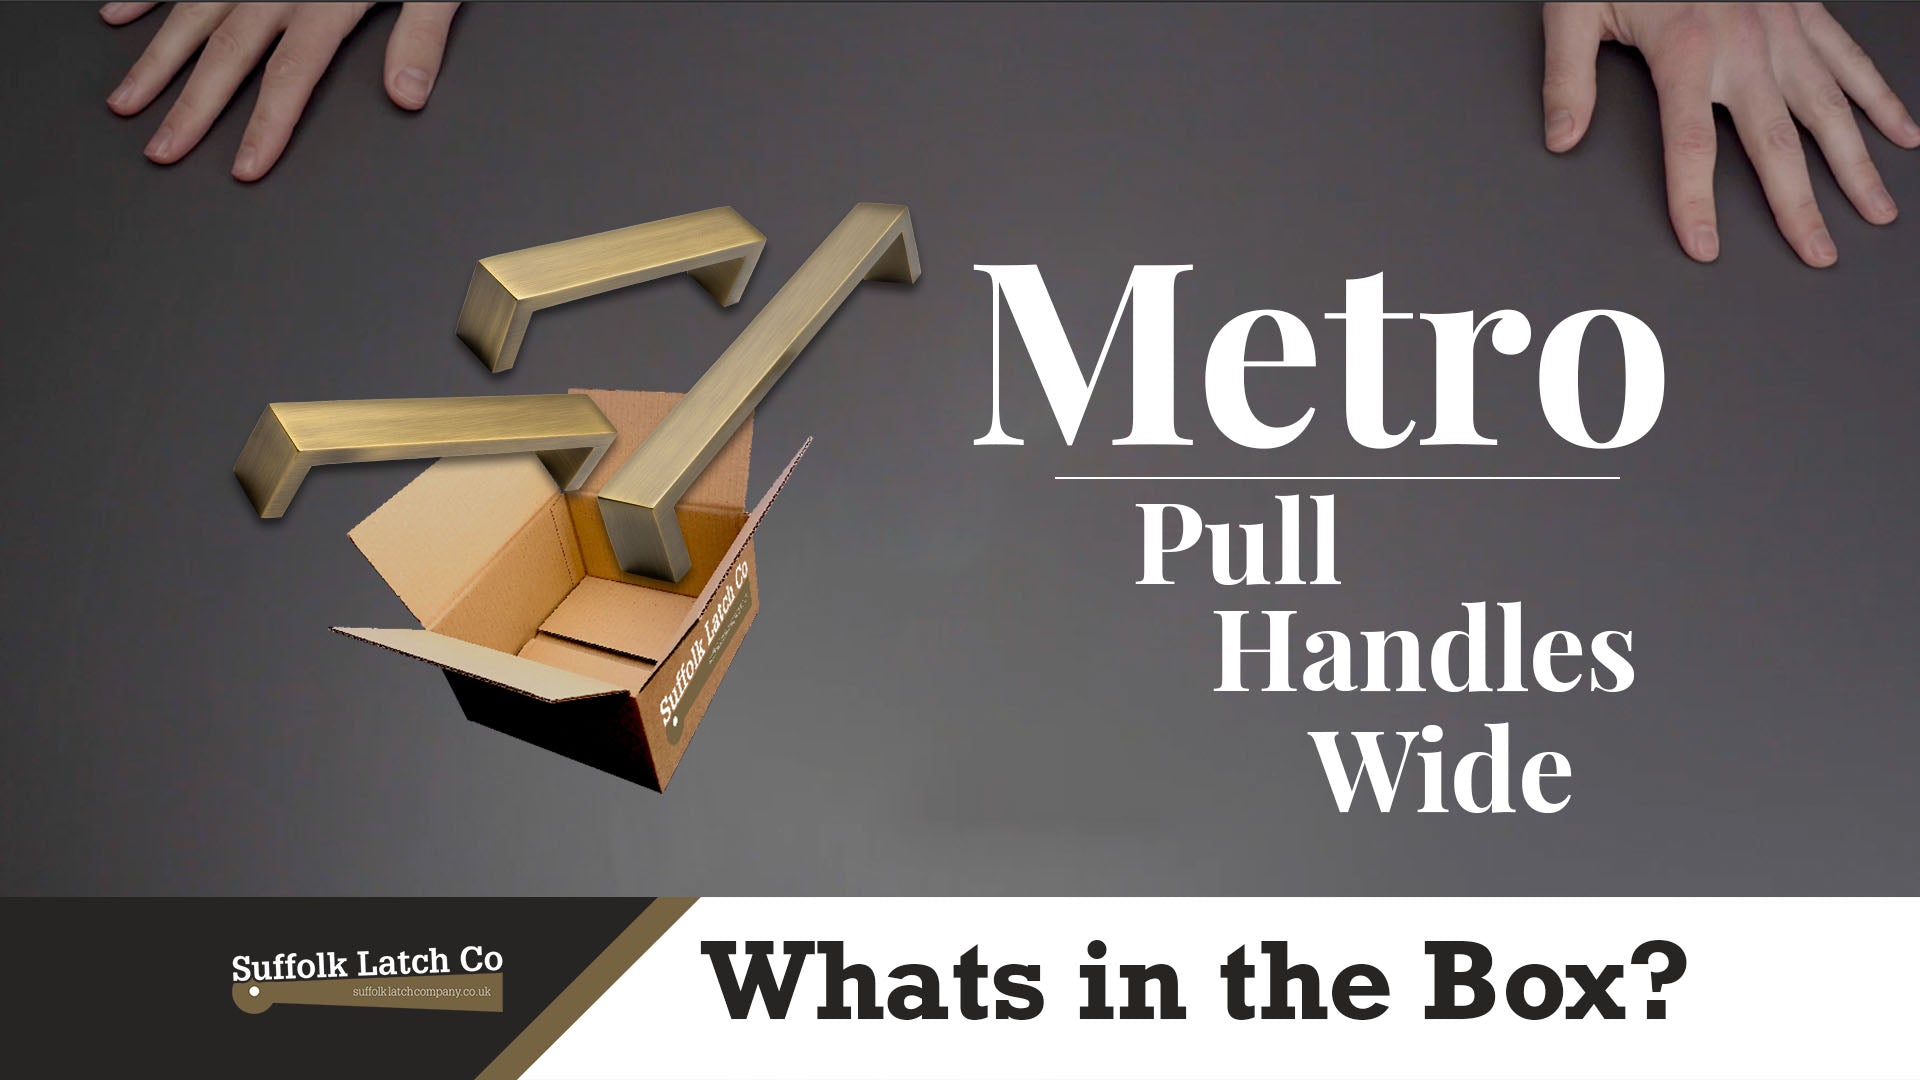 What's In The Box: Wide Metro Pull Handles